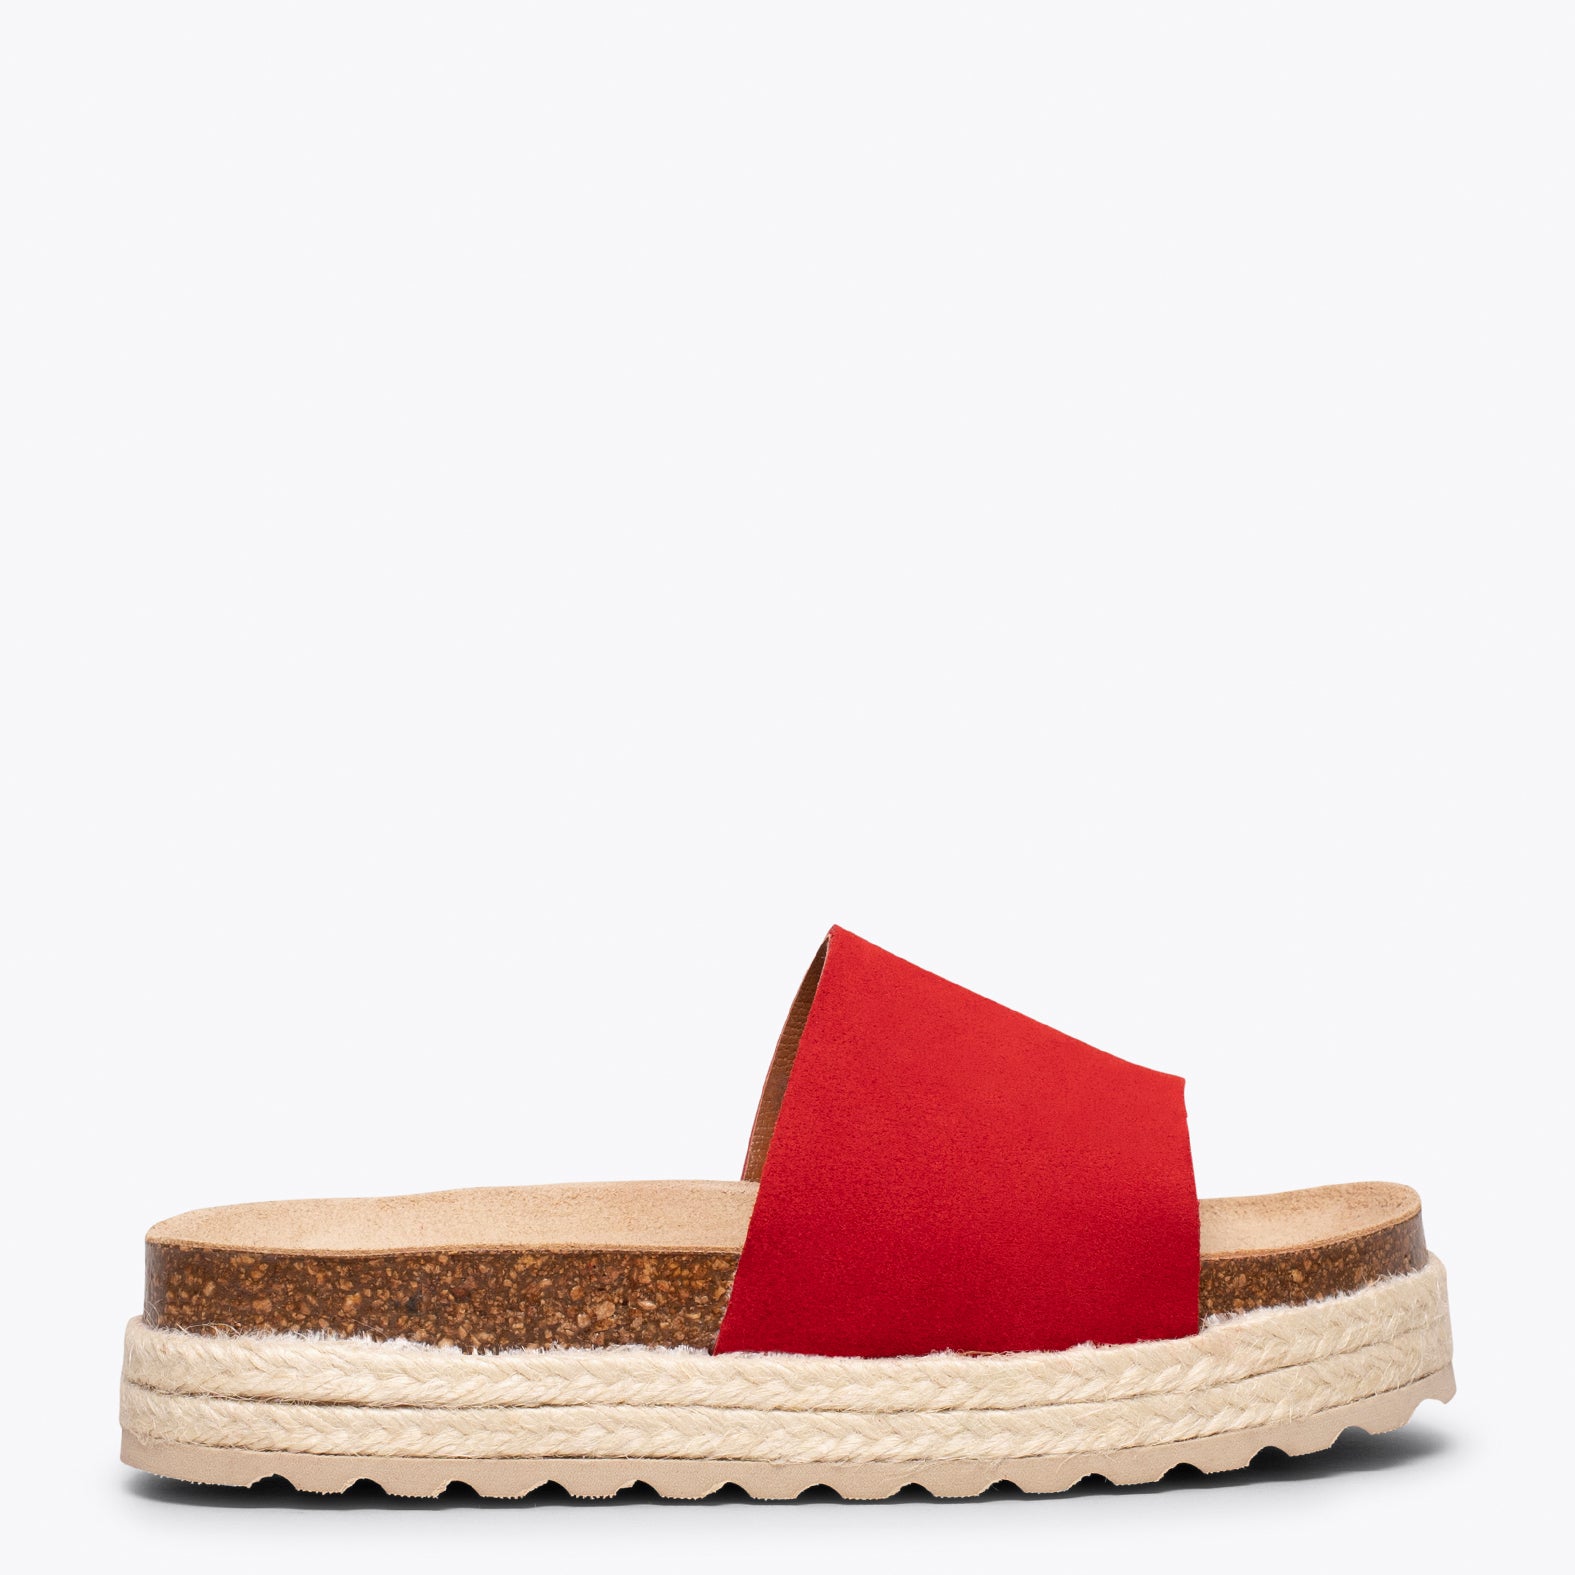 STRAWBERRY – RED flat sandals for girls